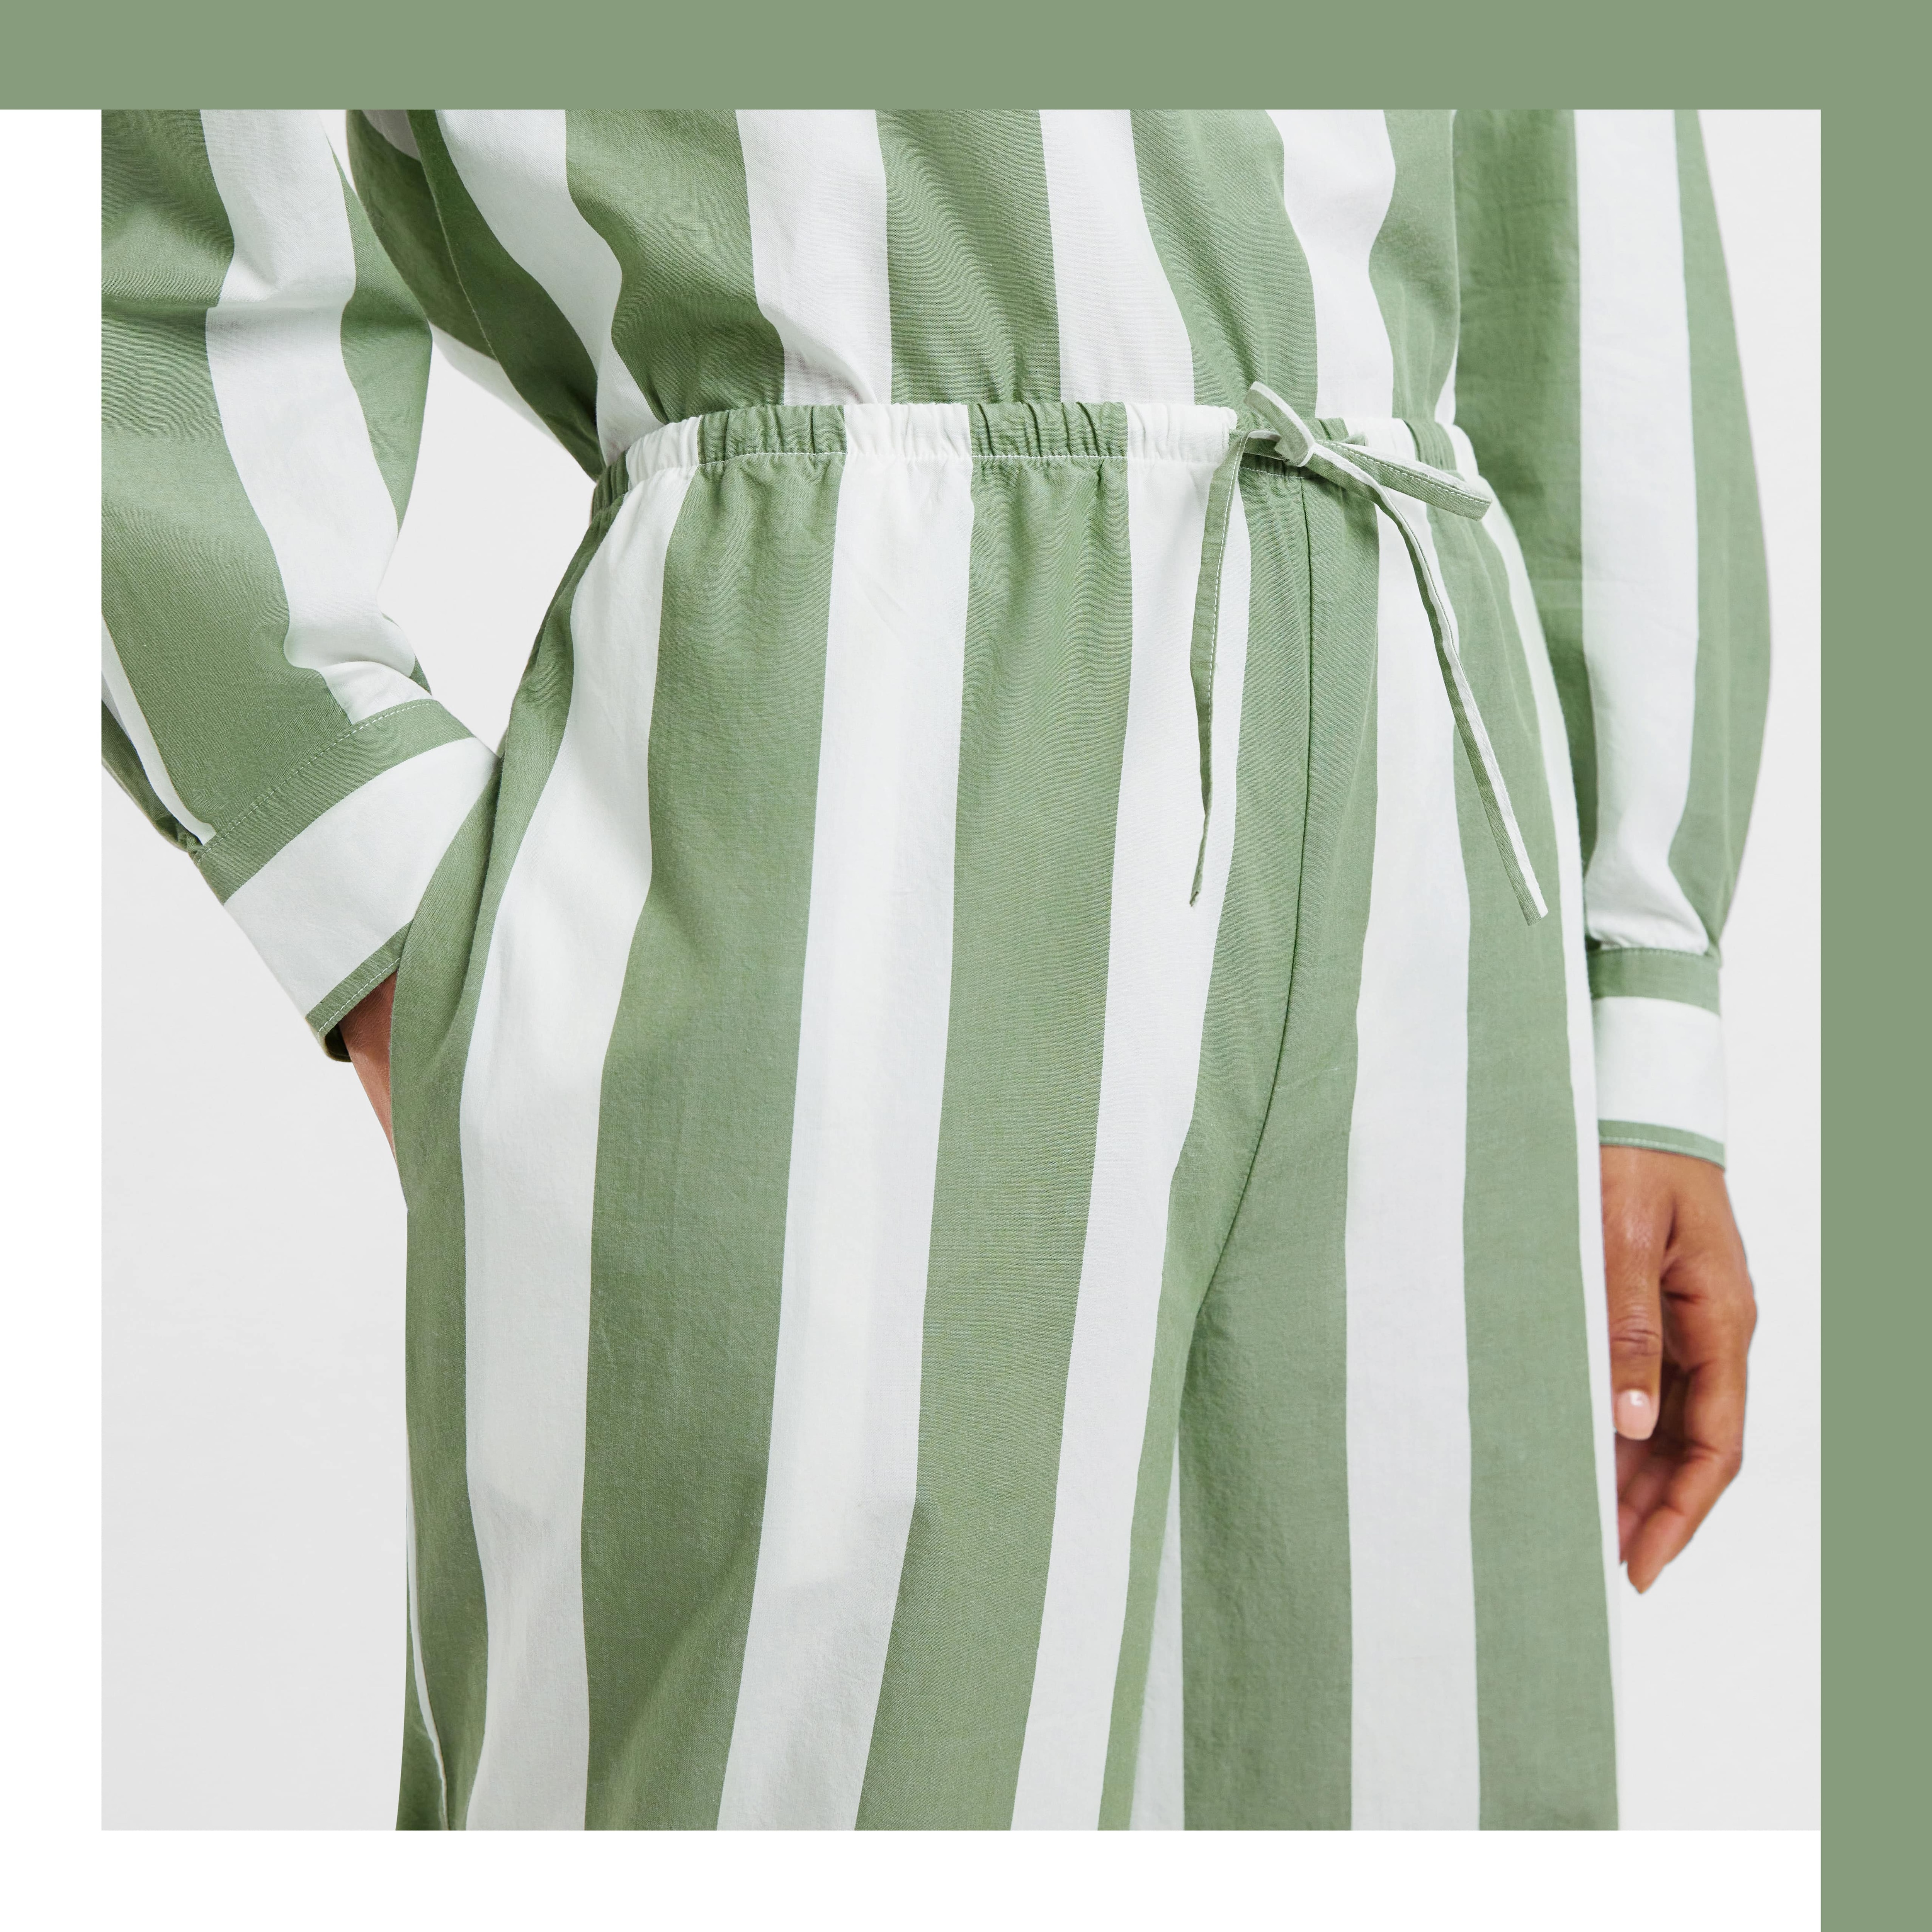 brown skinned woman wears green and white striped cypress pants. one hand is in her pocket, the other hands by her side